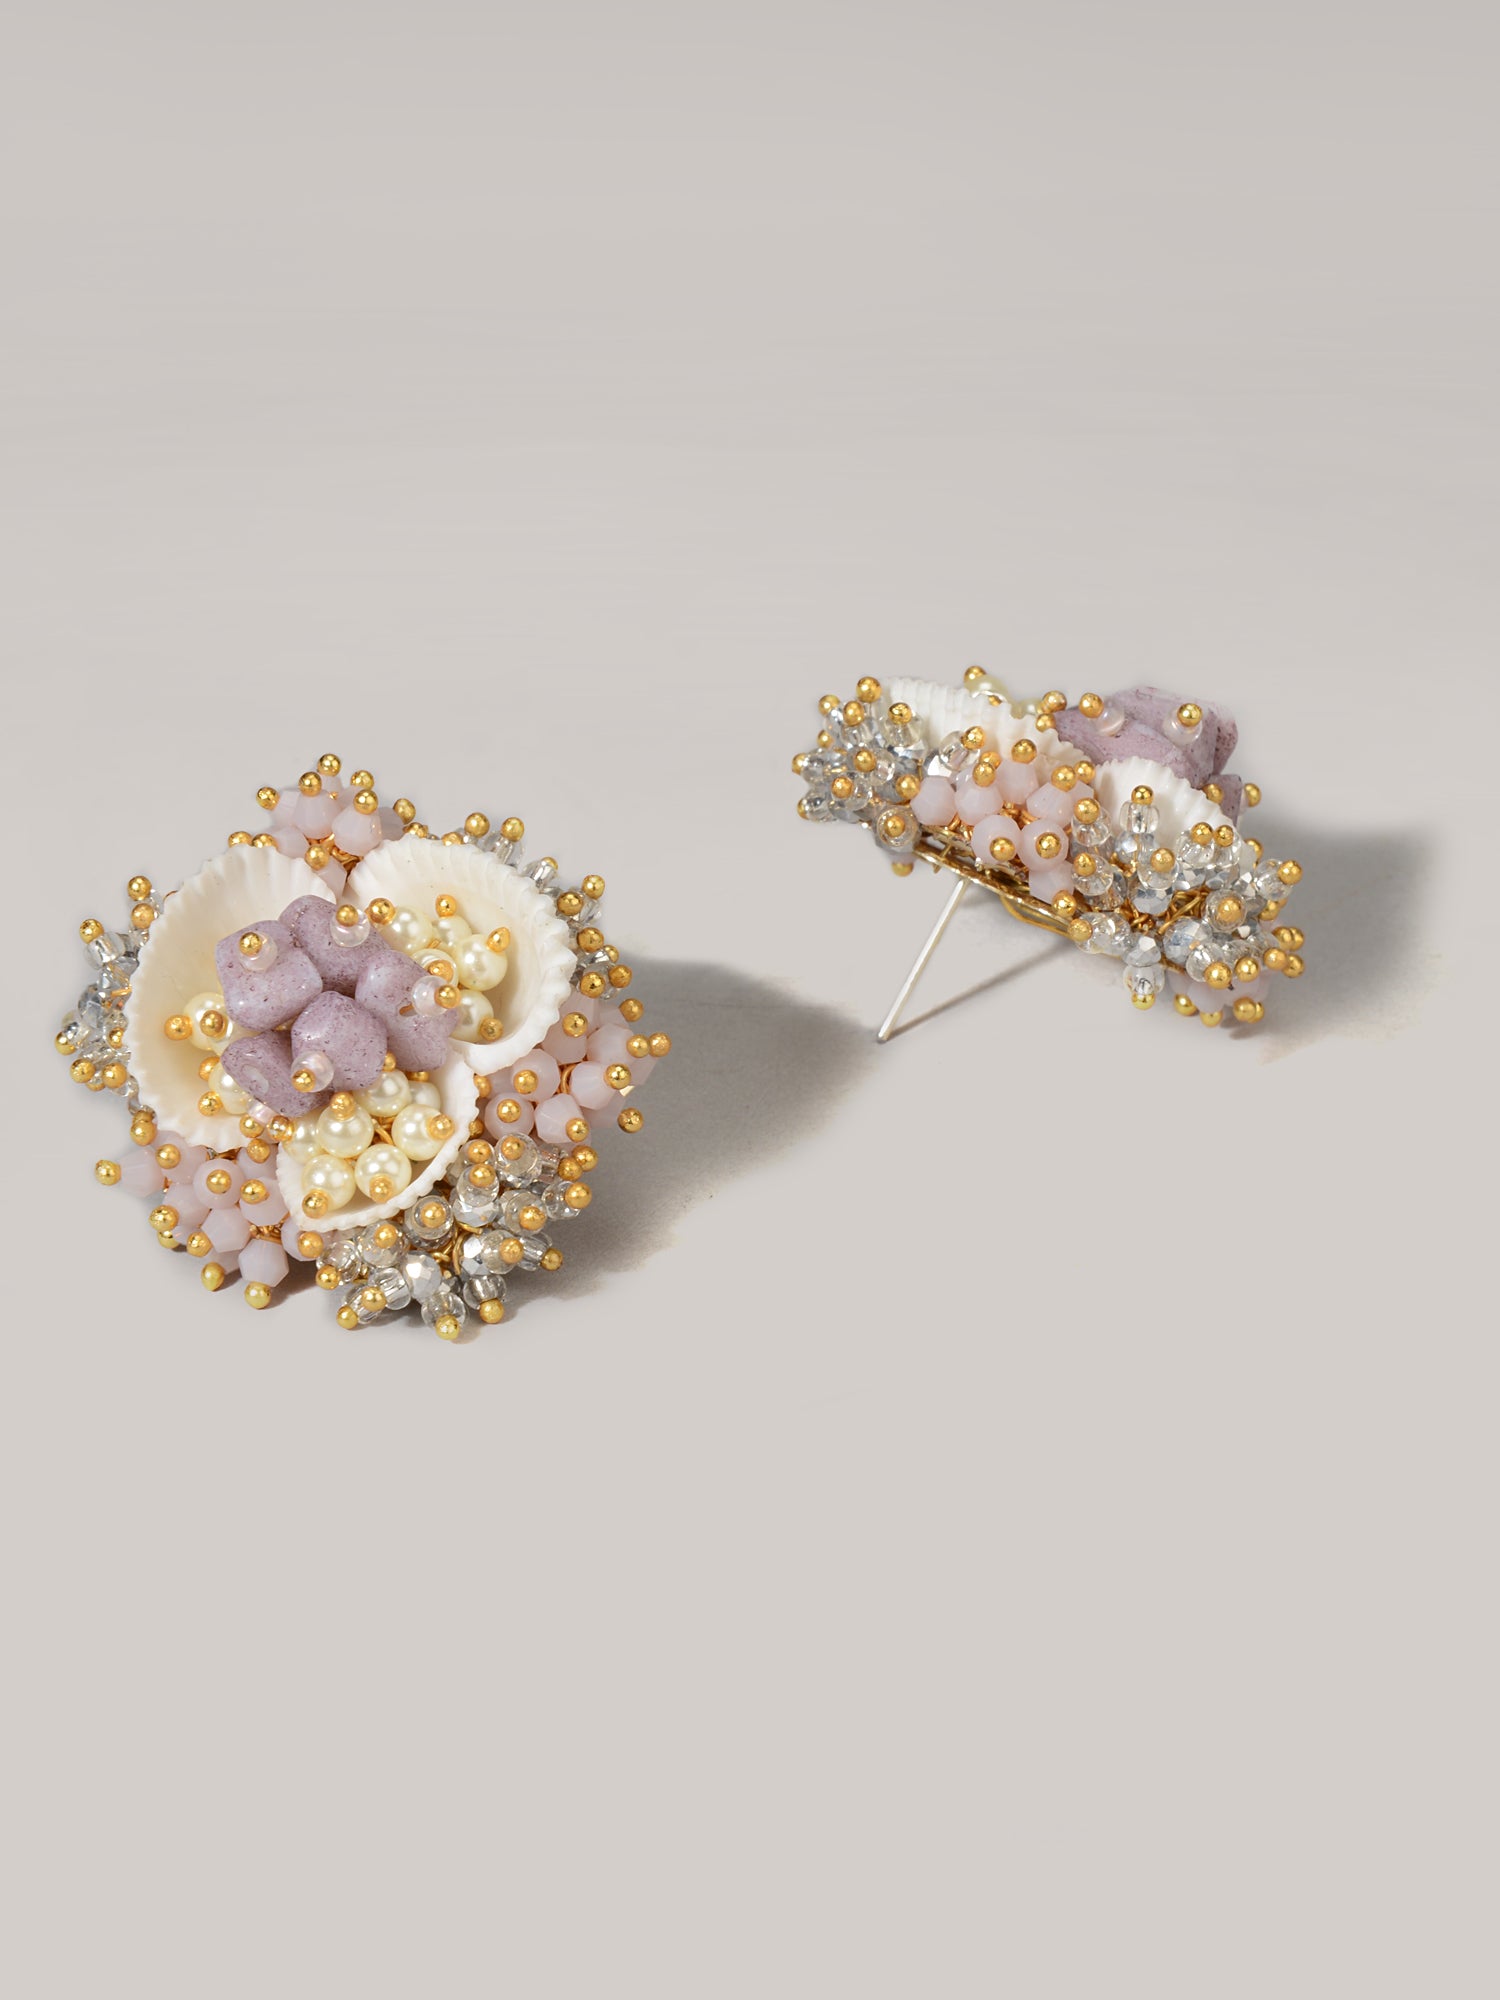 Amama,Akebia Quinata Cluster Bead Stud With Shell